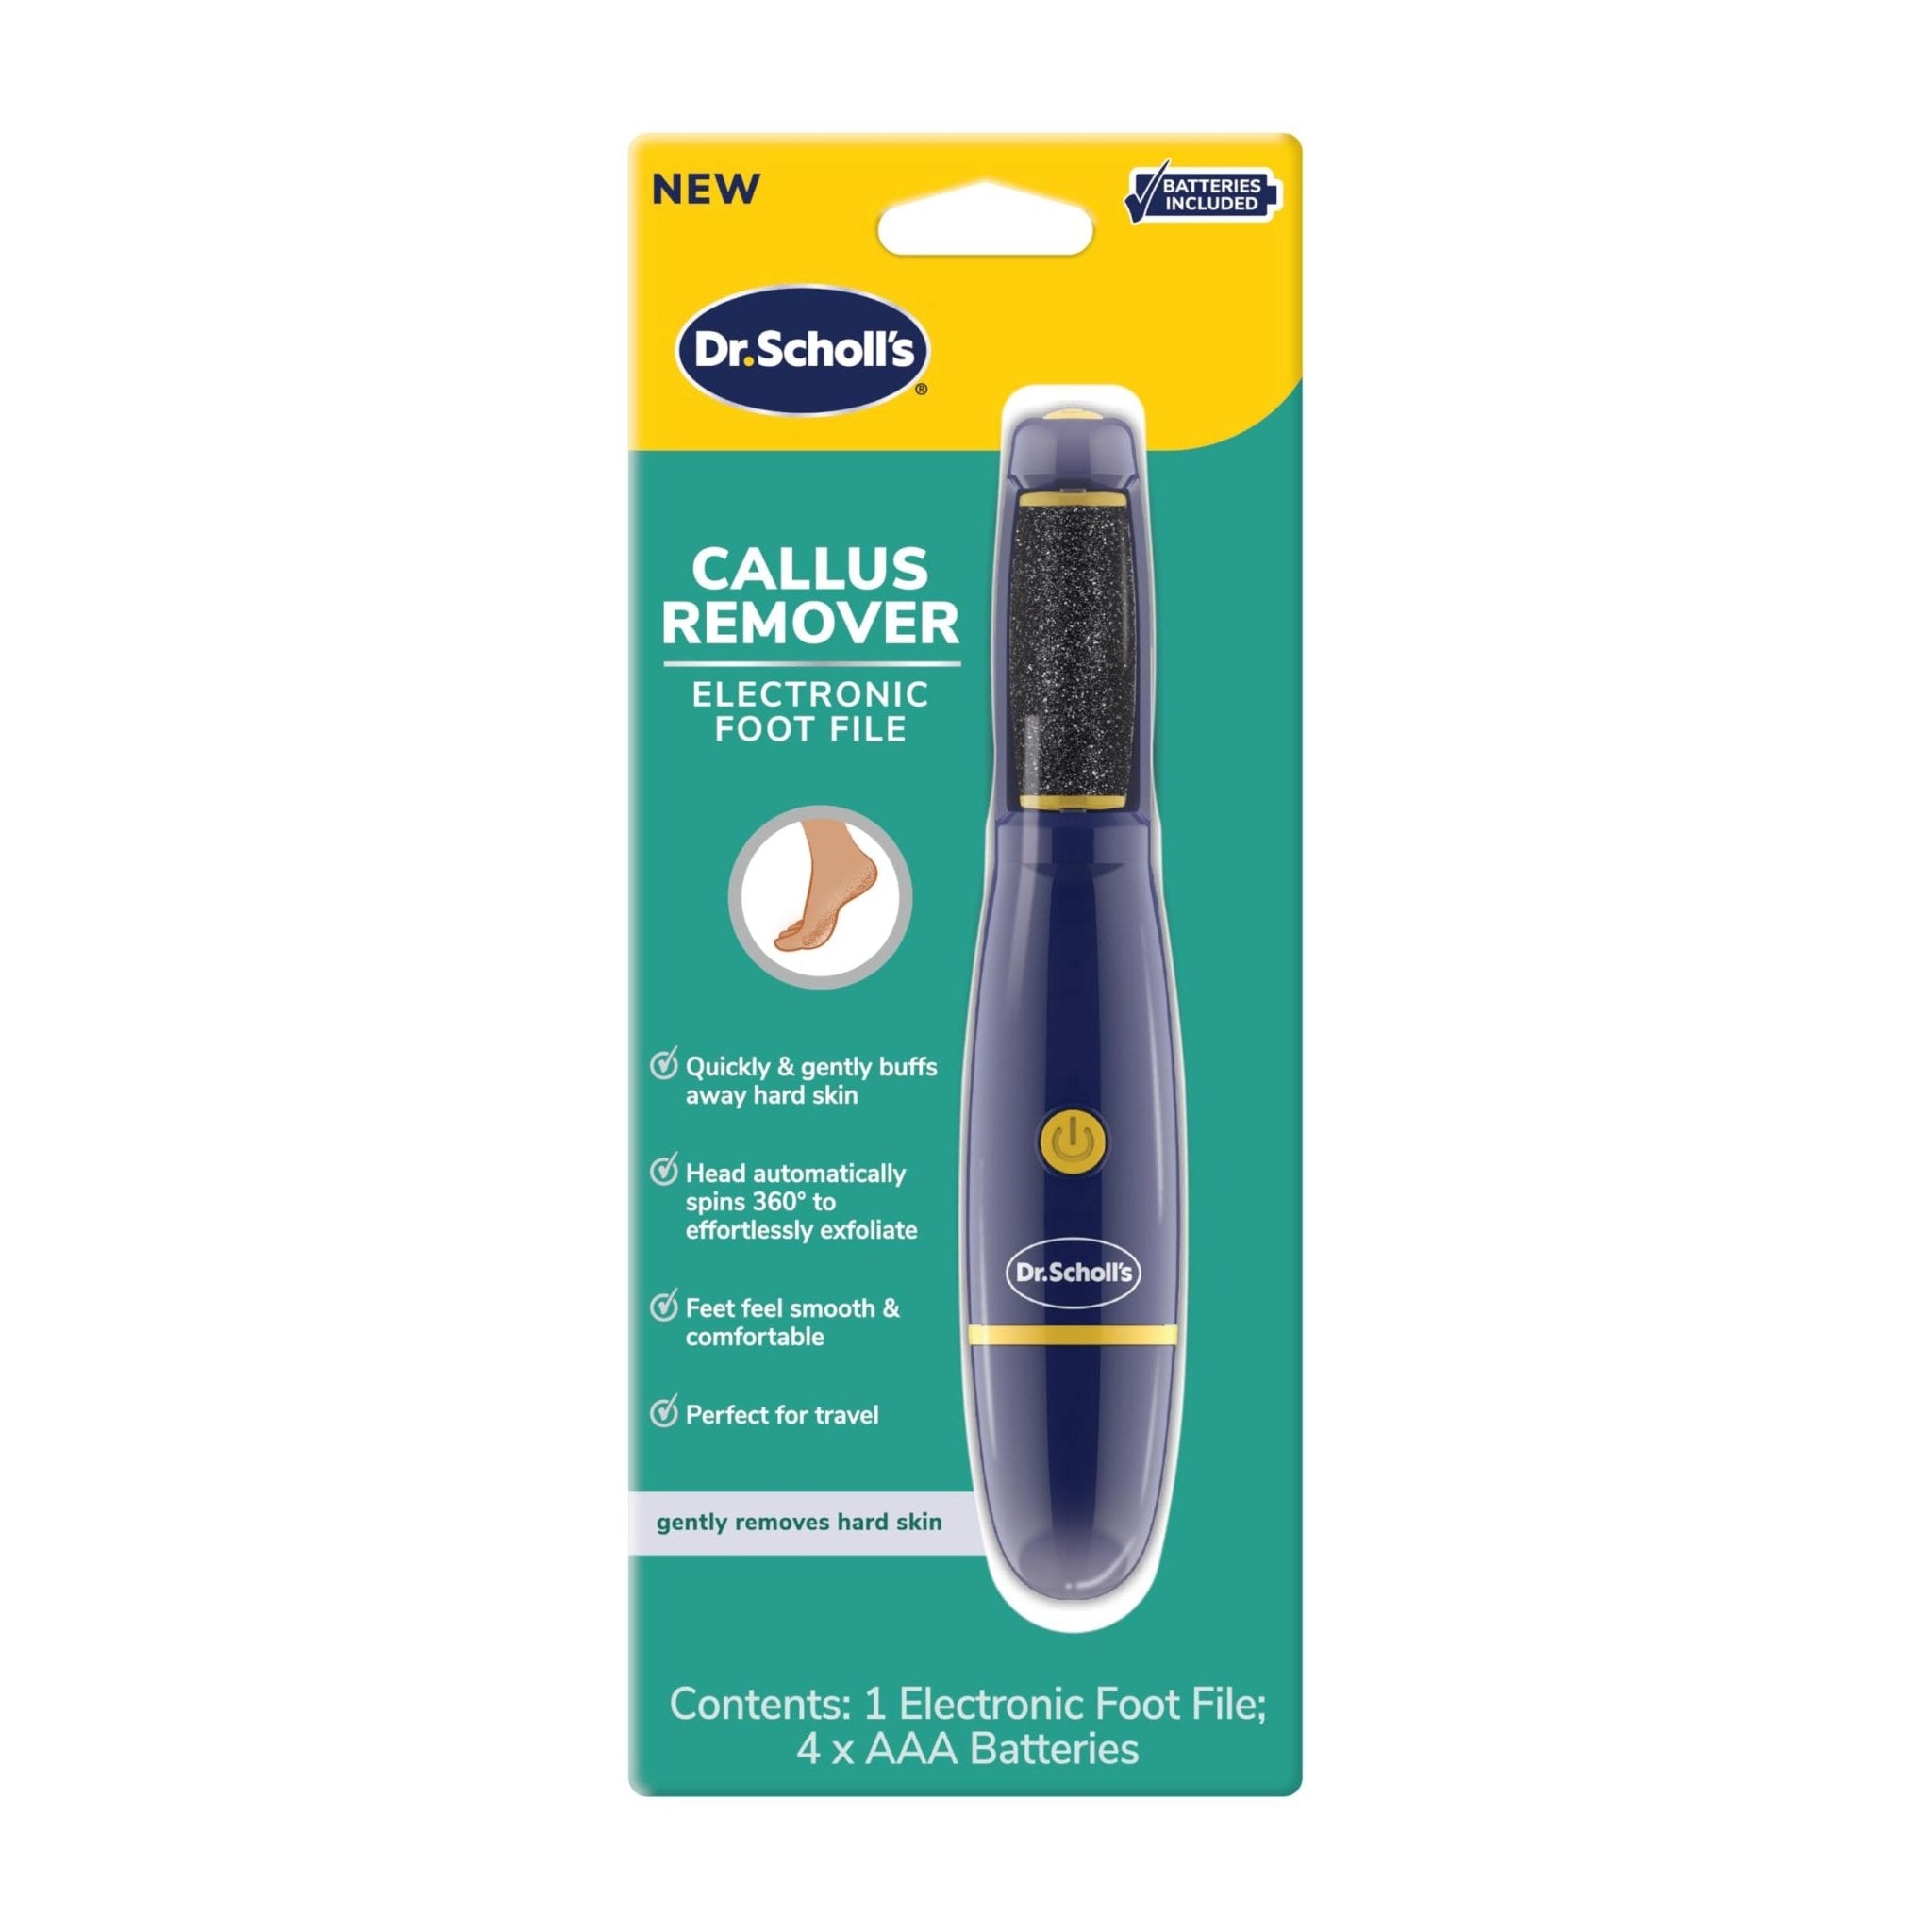 Dr. Scholls Callus Remover Electronic Foot File - Bloom Pharmacy